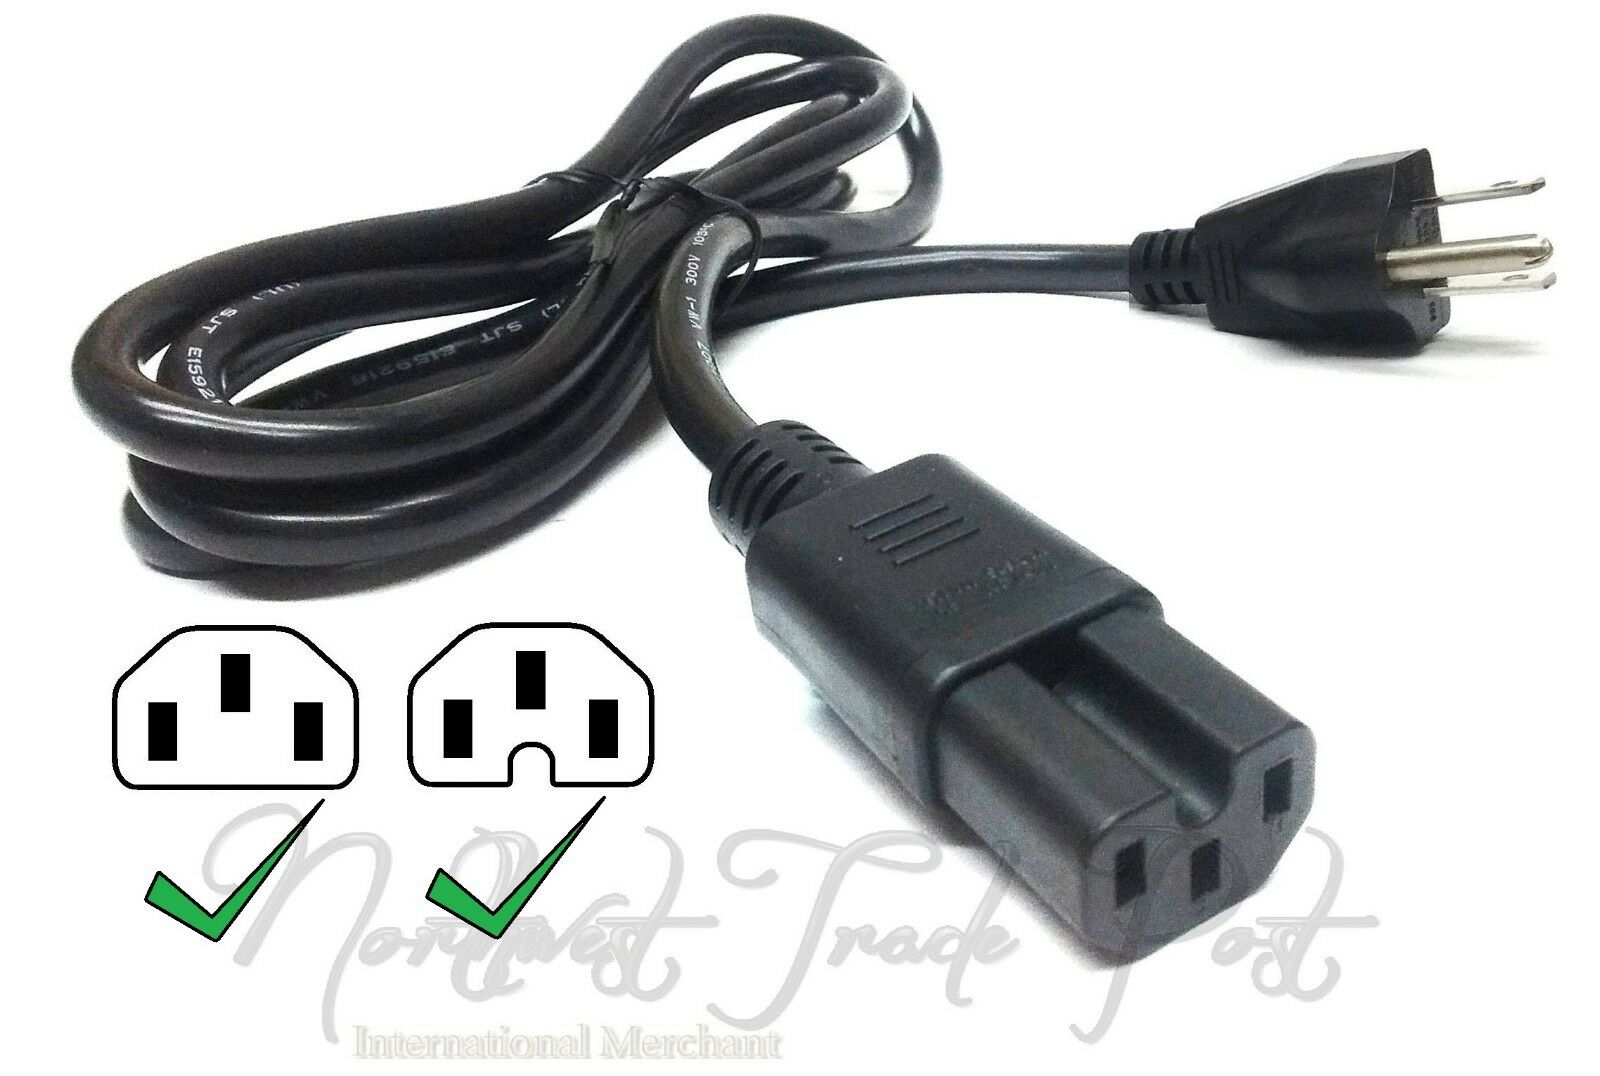 AC Power Cord Supply for ION iPA105Q Pathfinder II 2 Charger Bluetooth Speaker Model: iPA105 Modified Item: No Count - Click Image to Close